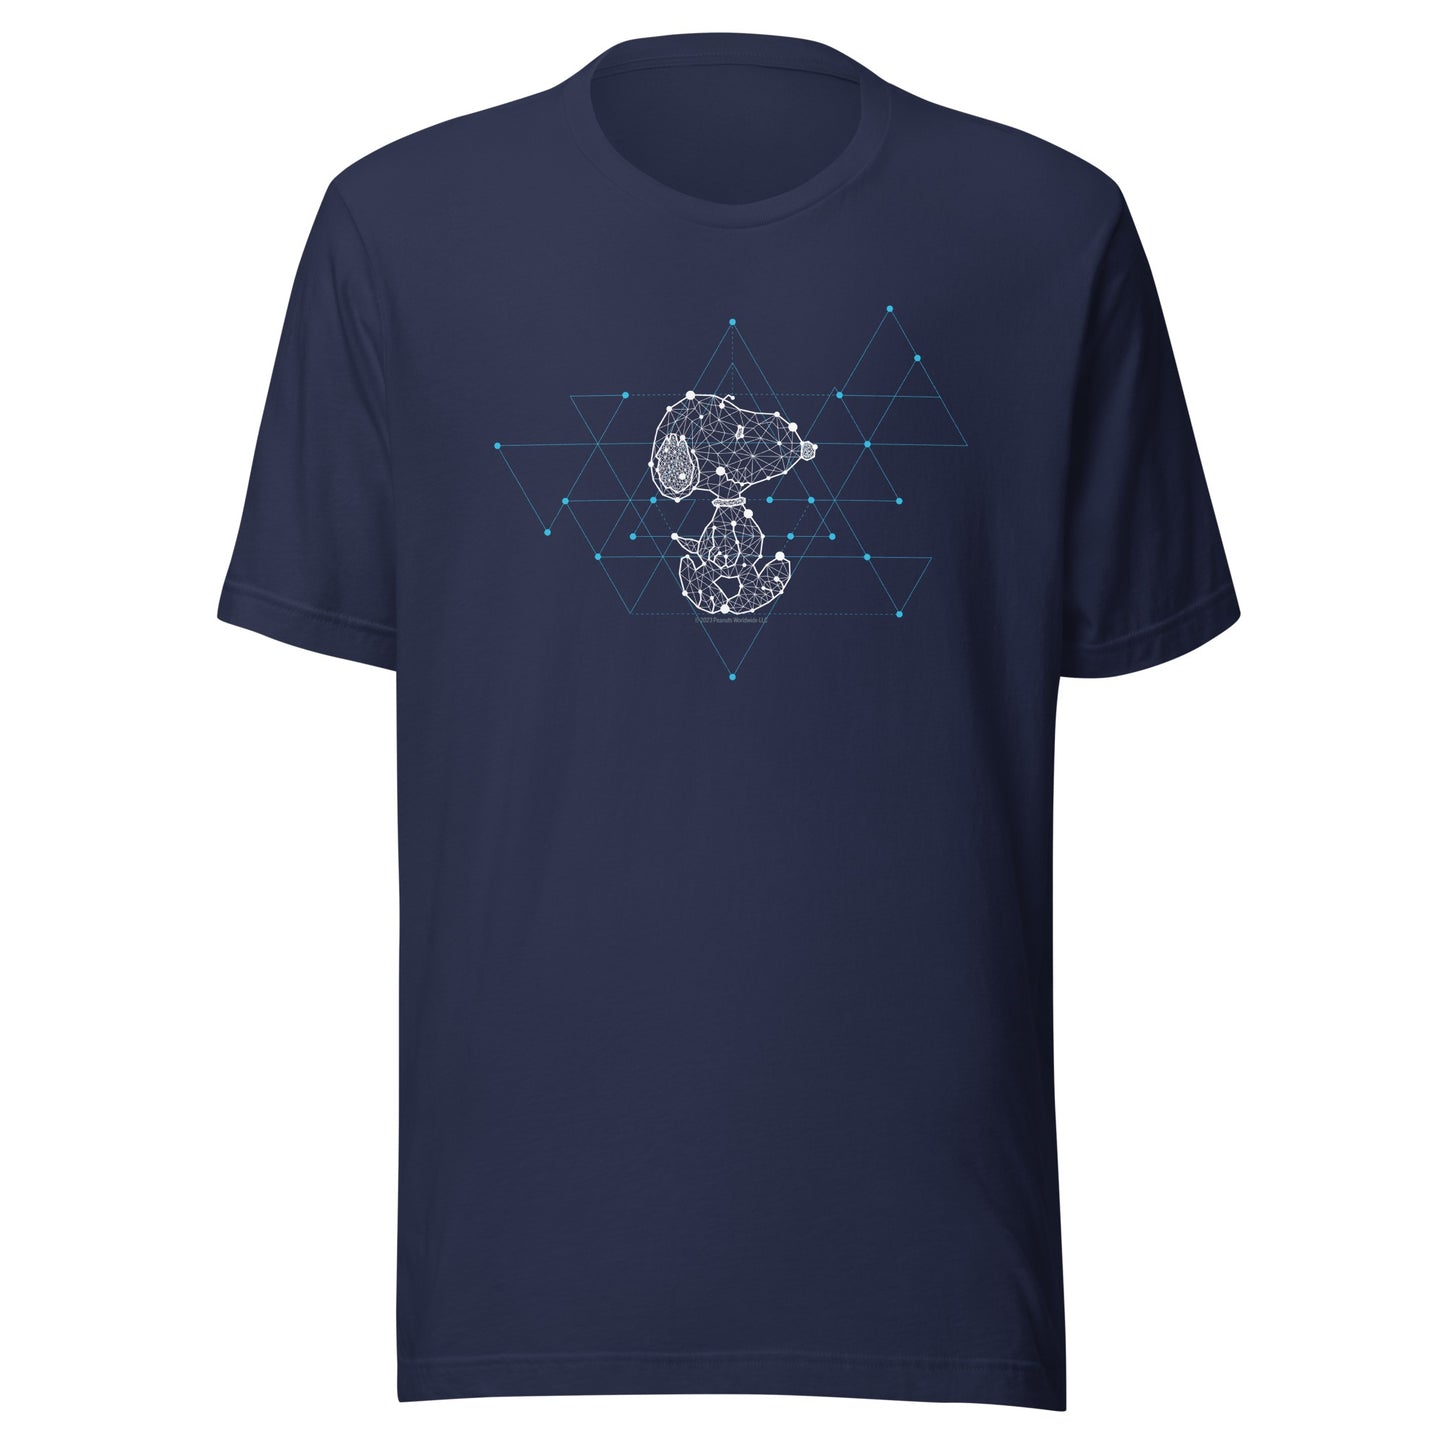 Snoopy Constellation Adult T-Shirt